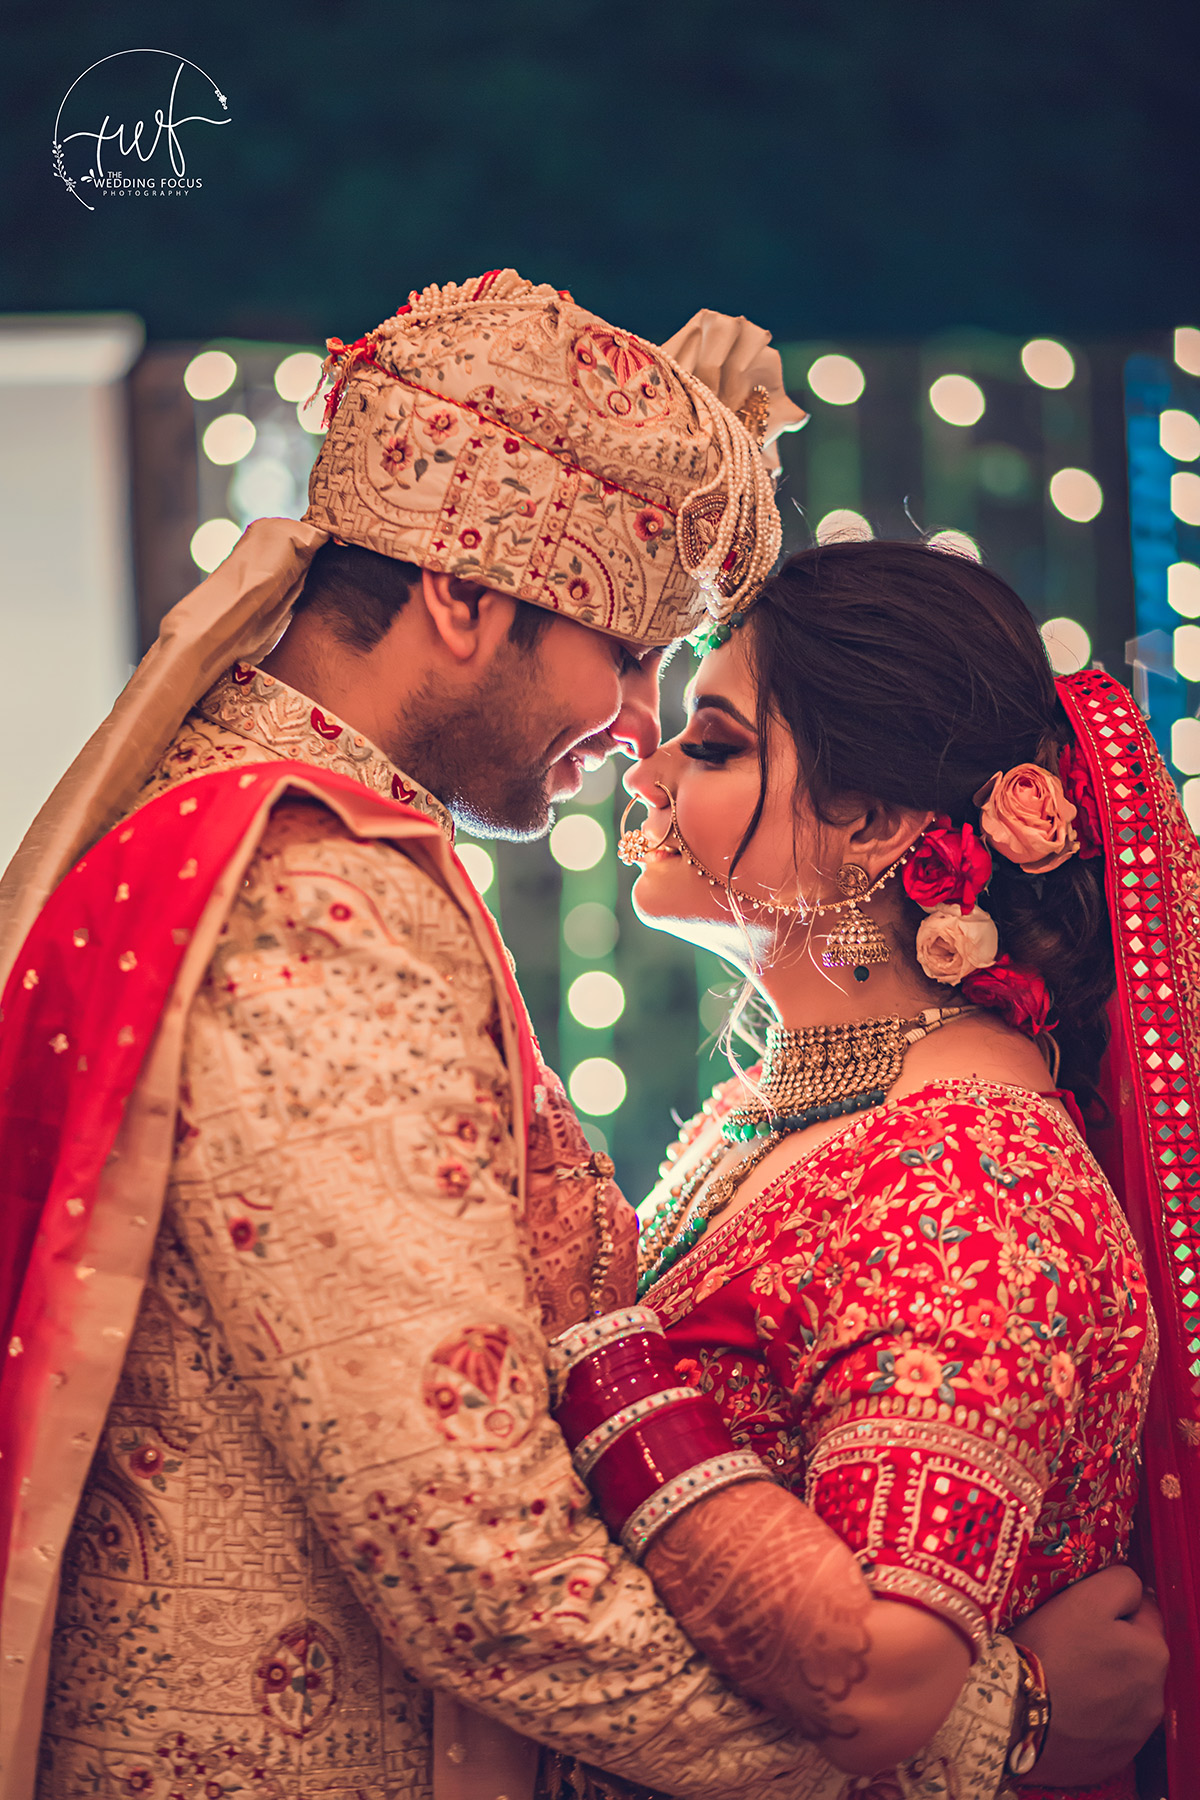 Wedding Photography Services at Best Price in Pune | Abhishek Joshi  Photography